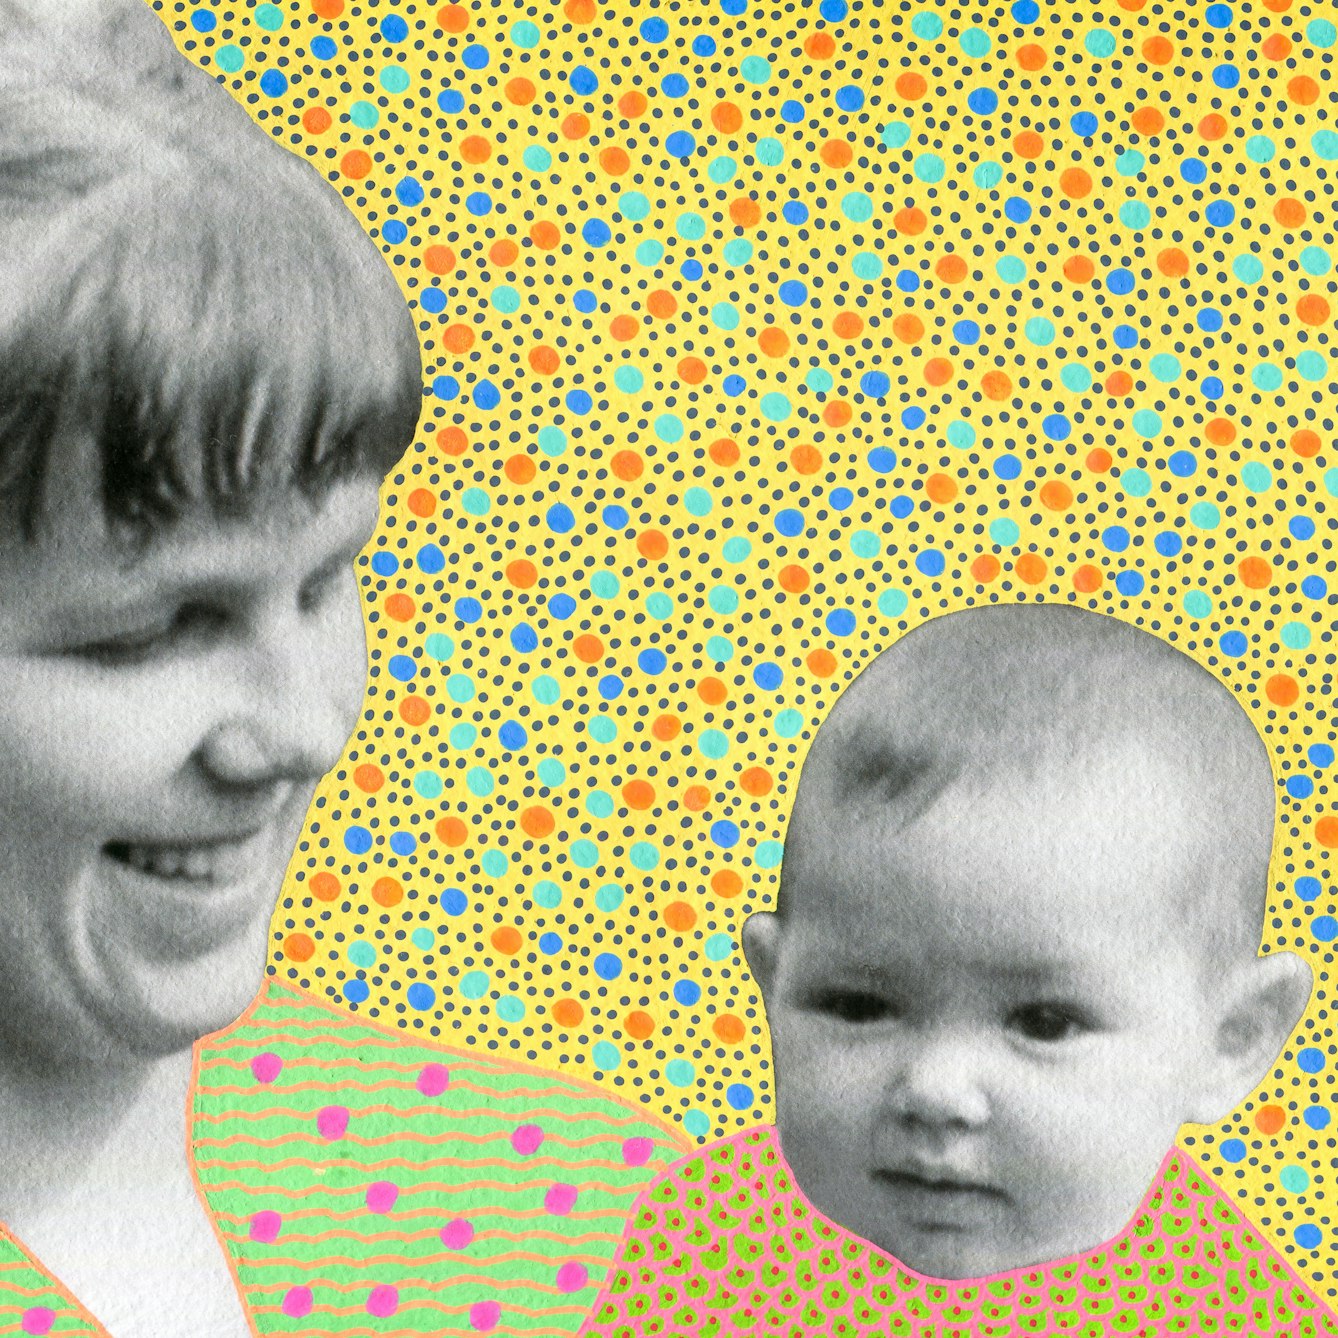 Artwork created by painting over the surface of a black and white photographic print with colourful paint. The artwork shows the original heads of two individuals from the photograph, on the left an adult woman and on the right a young baby. The baby is being held in the adult's arms. Apart from the heads the rest of the image is a painted yellow background covered in small green, orange and blue dots. The individual's cloths are painted differently, the adult's has a green background with wavy orange horizontal lines and pink spots. The baby's is green with pink cell like patterns with red centres.